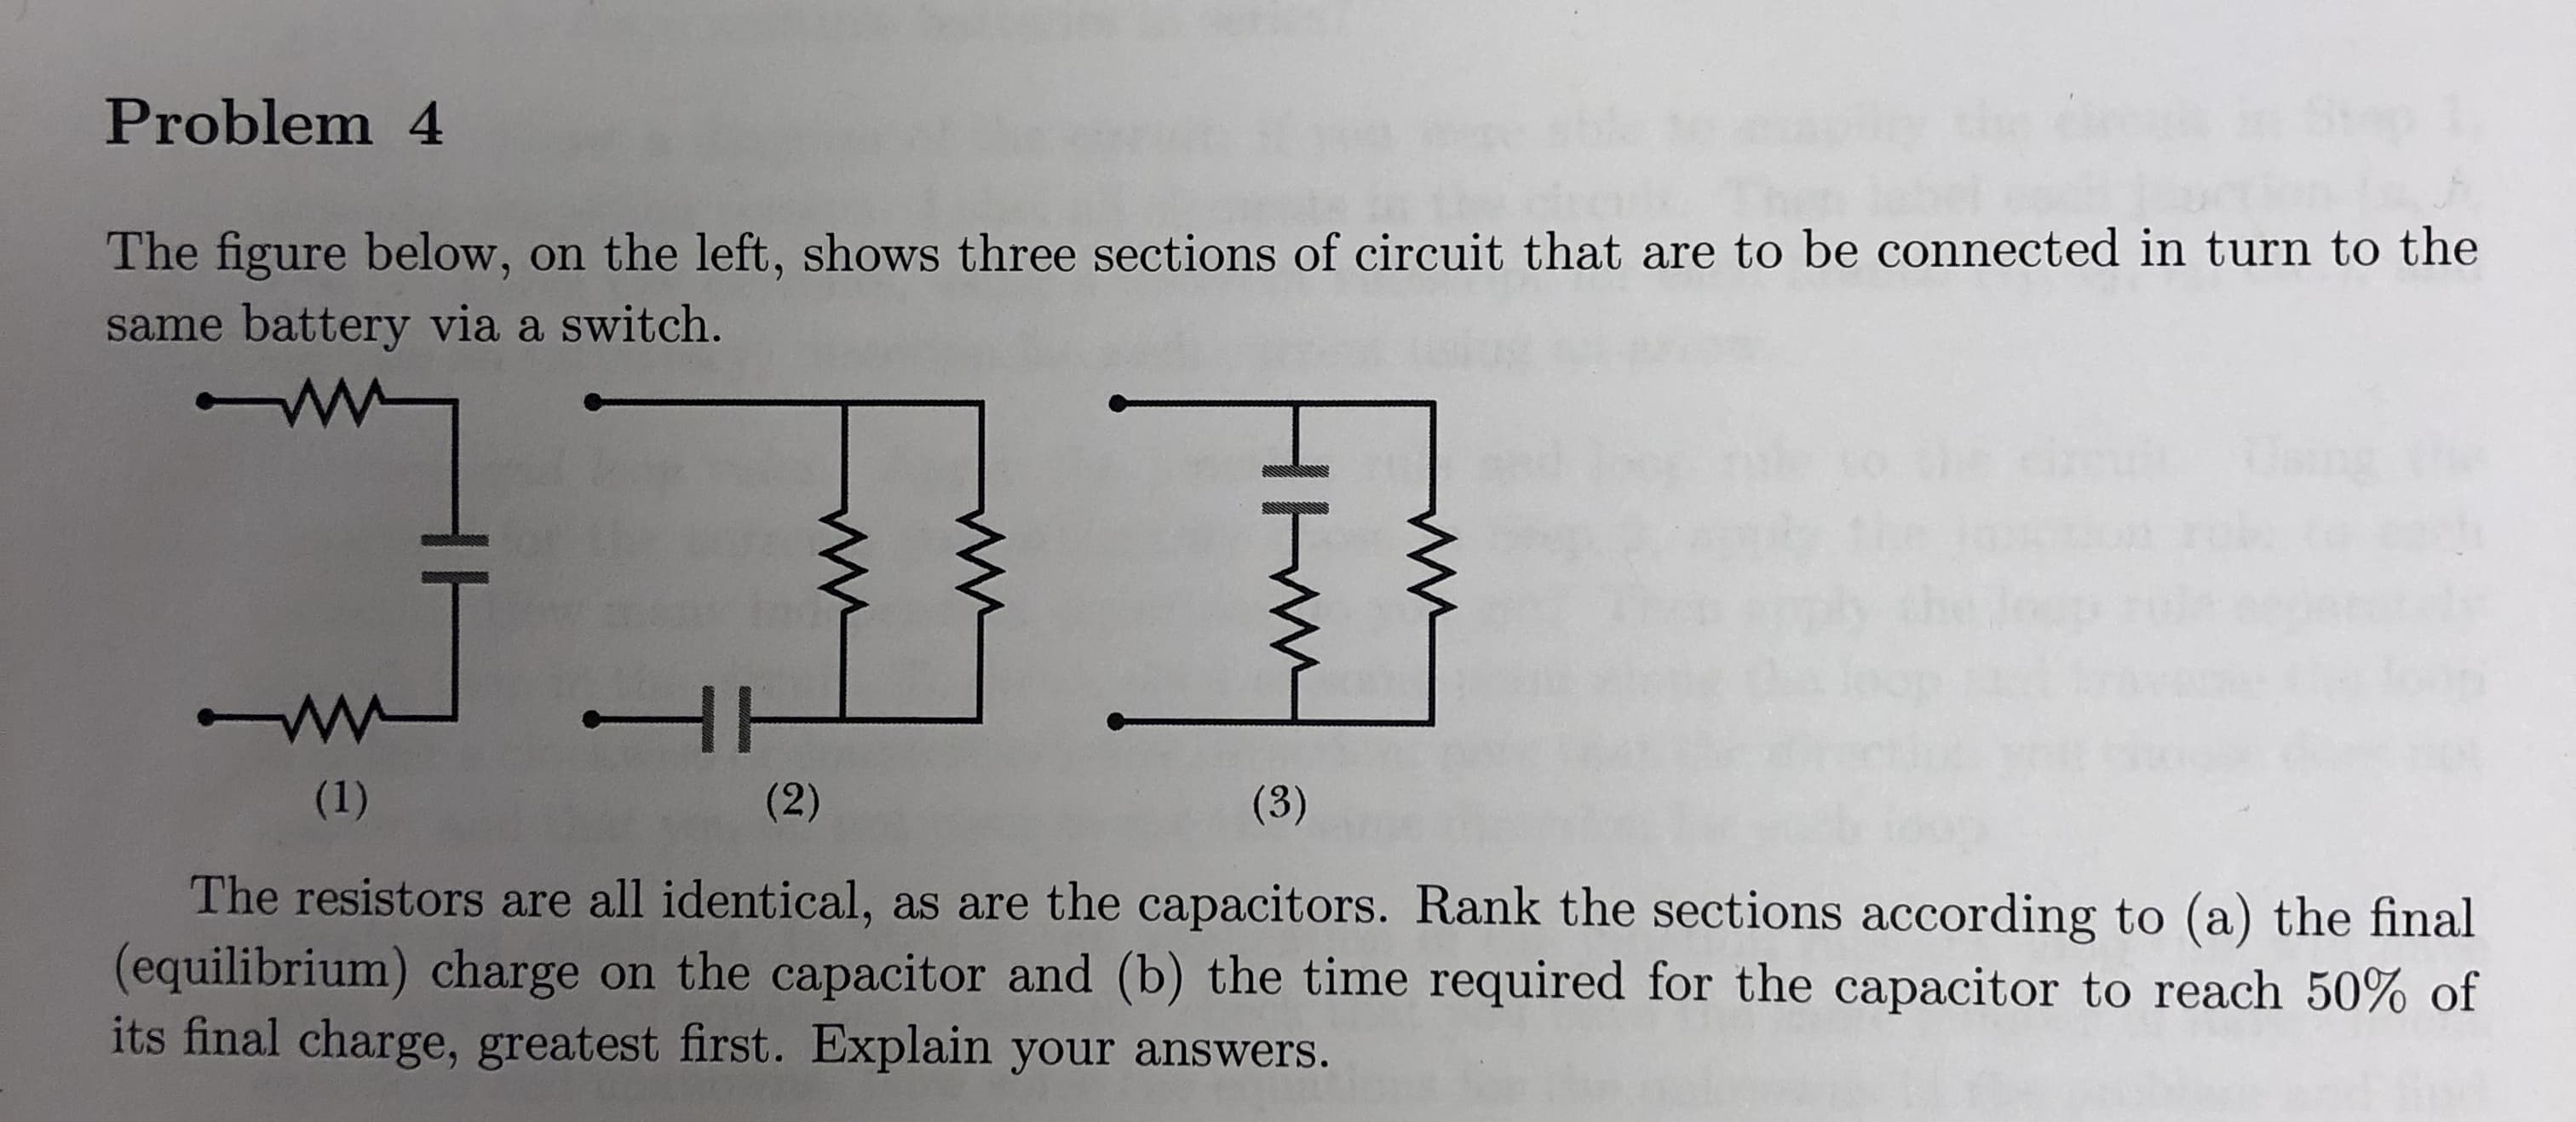 Problem 4
The figure below, on the left, shows three sections of circuit that are to be connected in turn to the
same battery via a switch.
The resistors are all identical, as are the capacitors. Rank the sections according to (a) the final
(equilibrium) charge on the capacitor and (b) the time required for the capacitor to reach 50% of
its final charge, greatest first. Explain your answers
